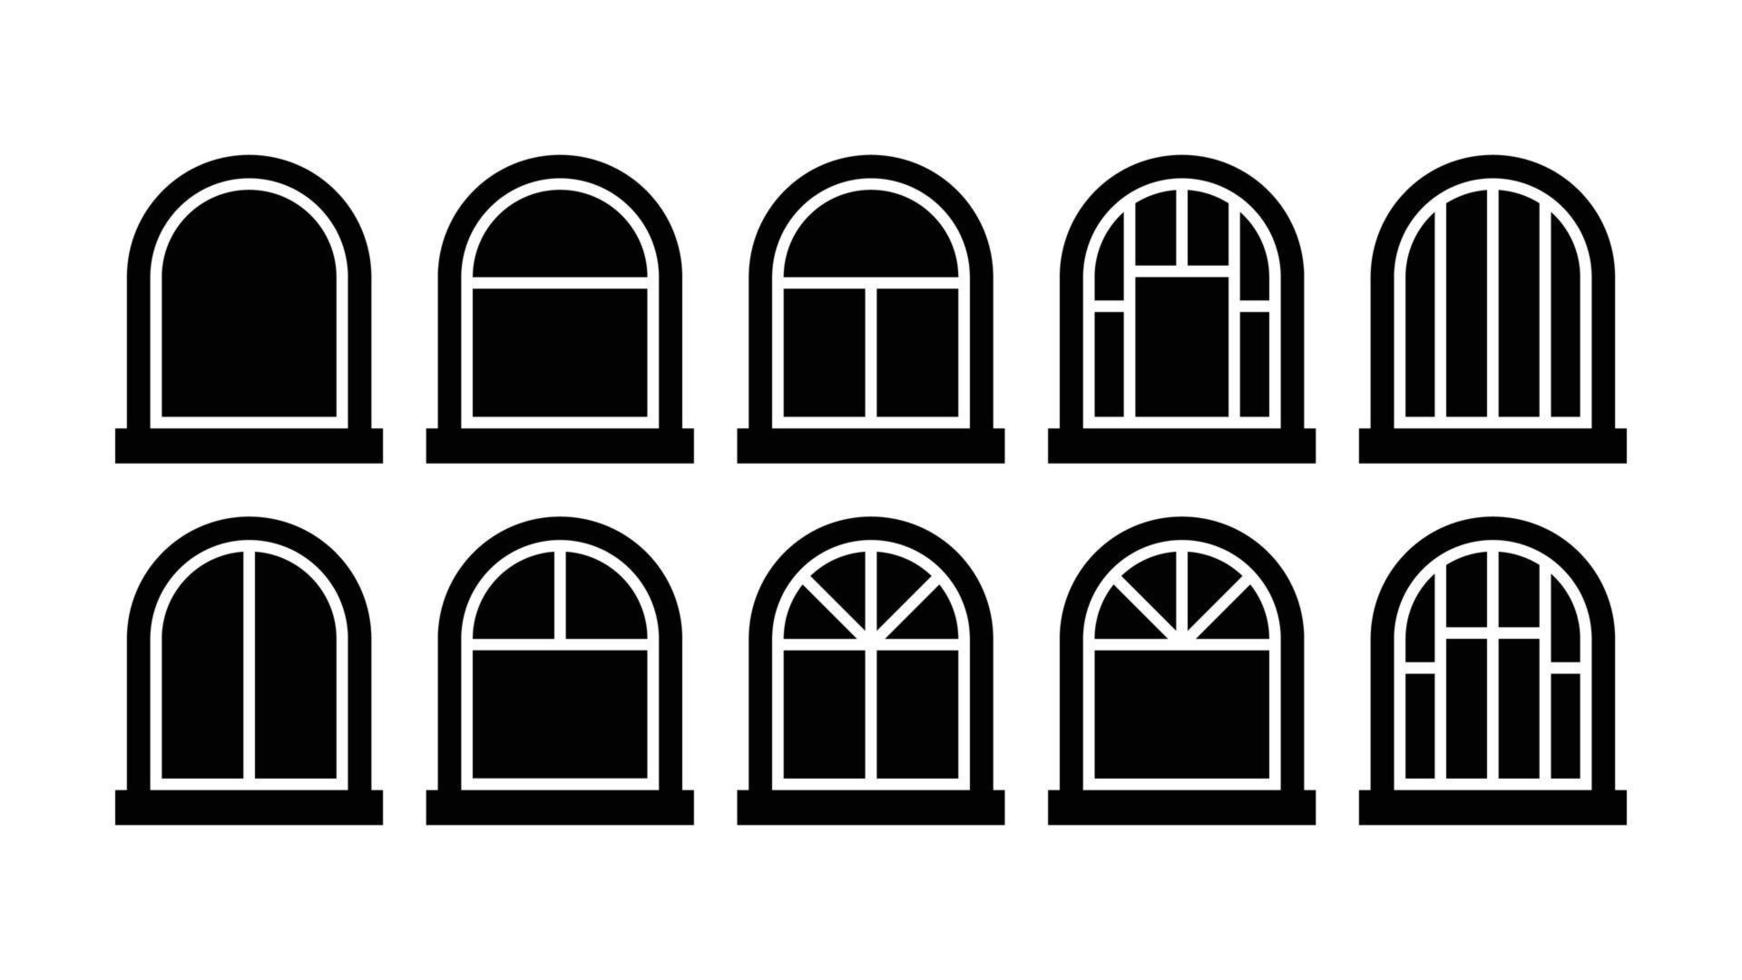 Ten arched windows shape collection vector